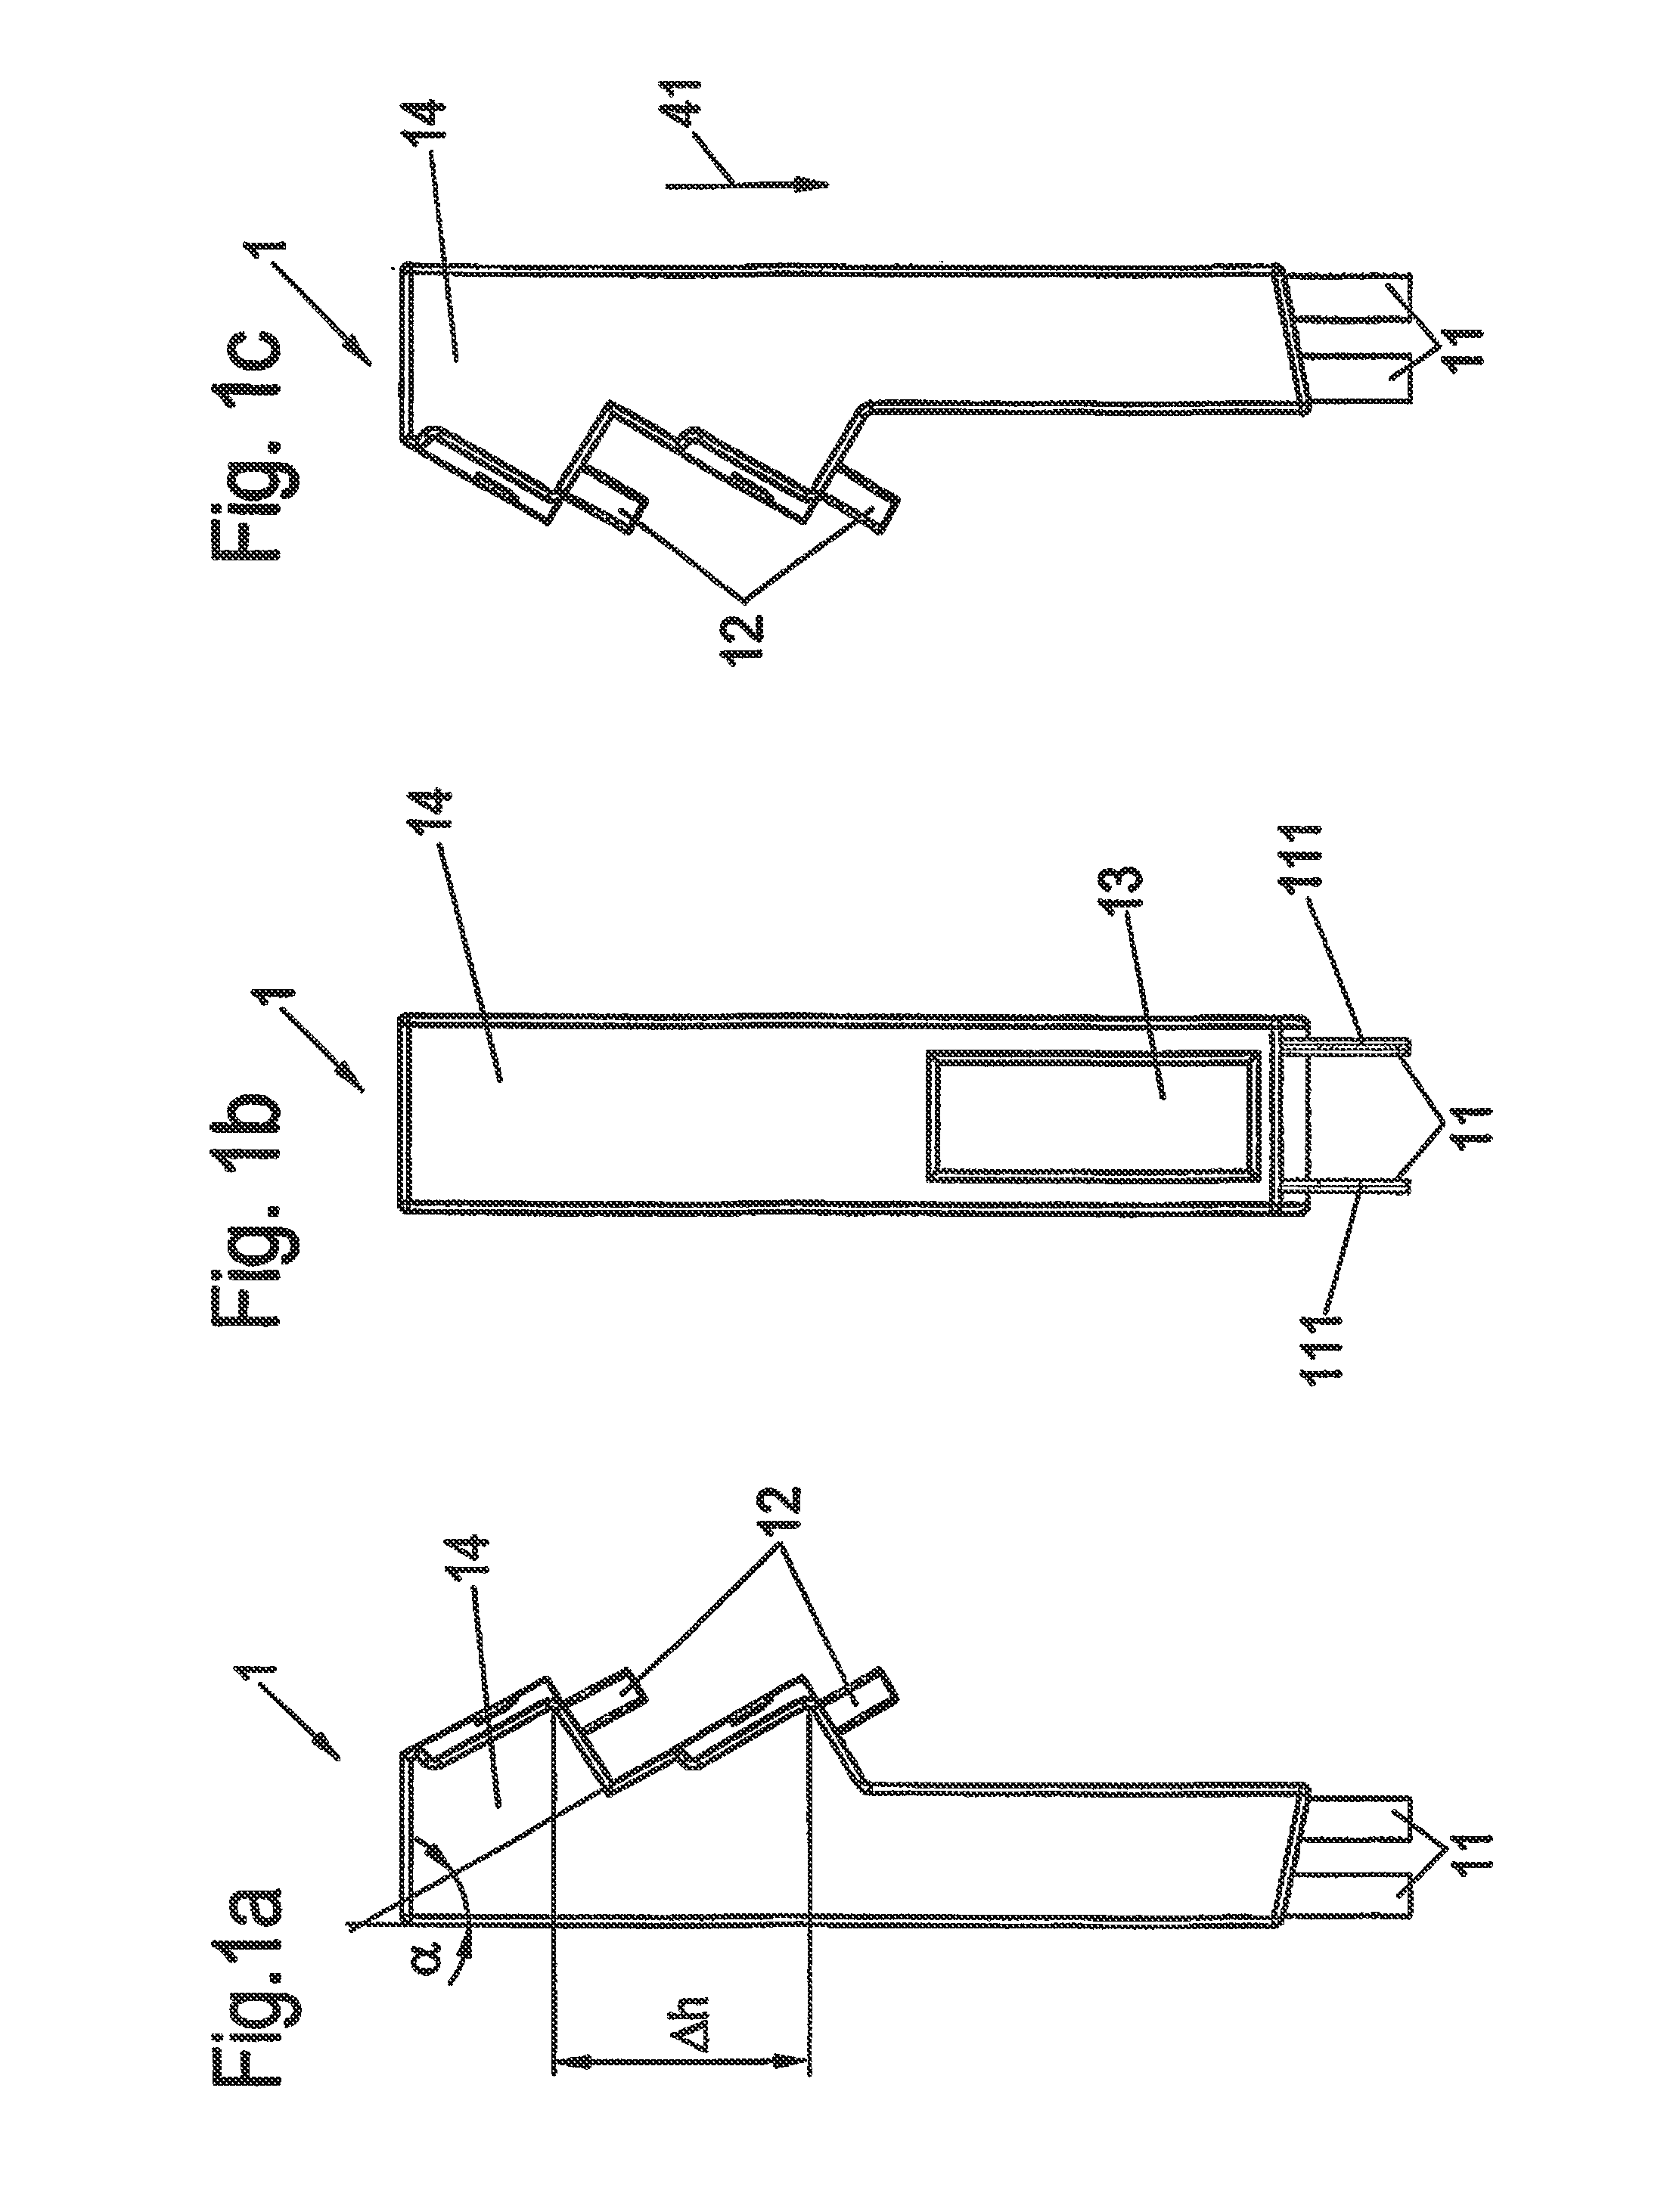 Attachment having a module and an electronics atachment